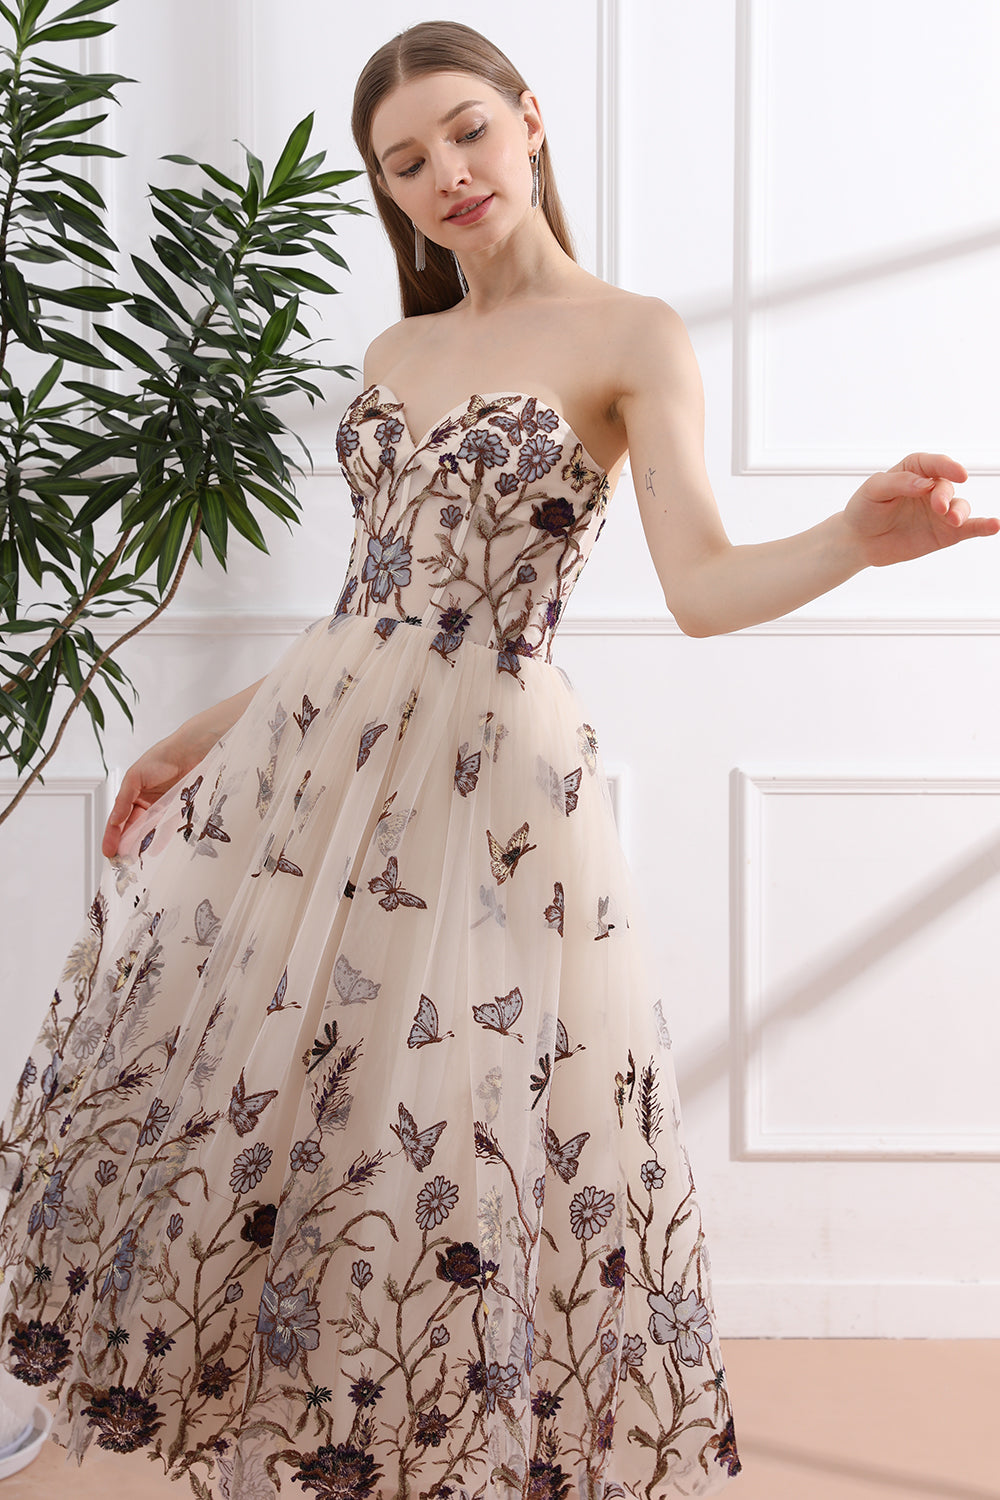 Strapless Corset Floral Butterfly Embroidery Midi Dress